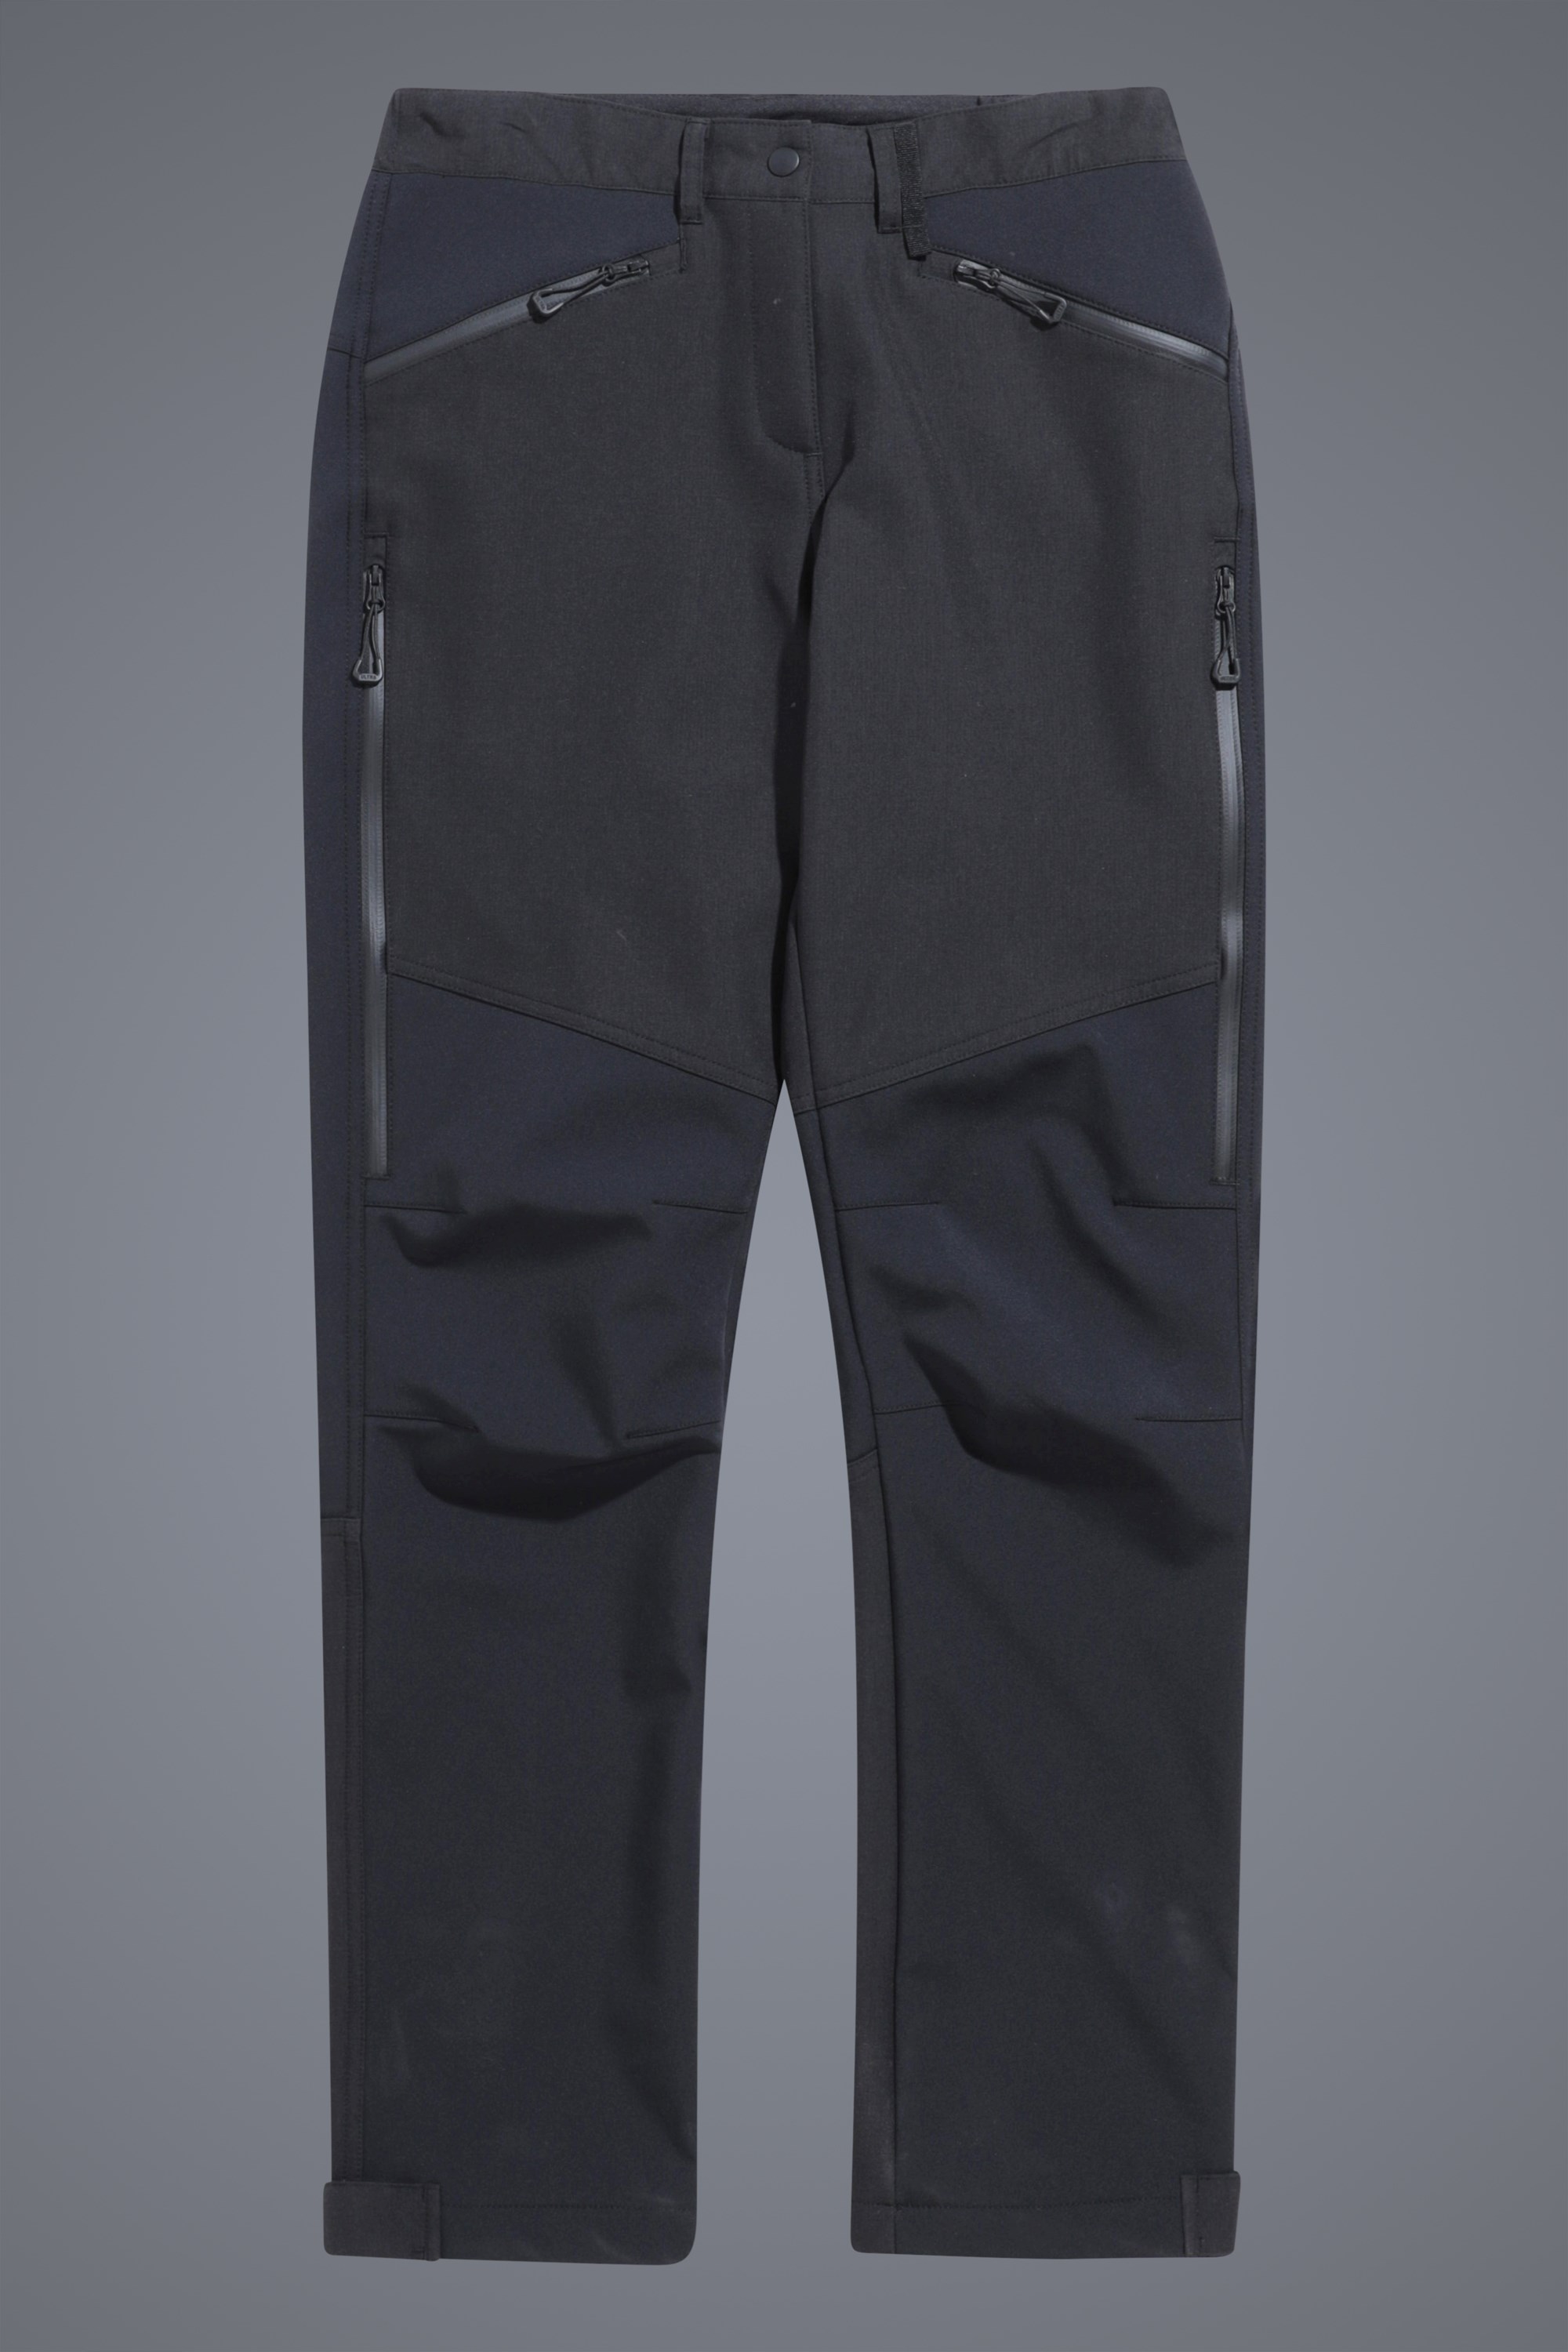 Womens Water Resistant Hiking Trousers